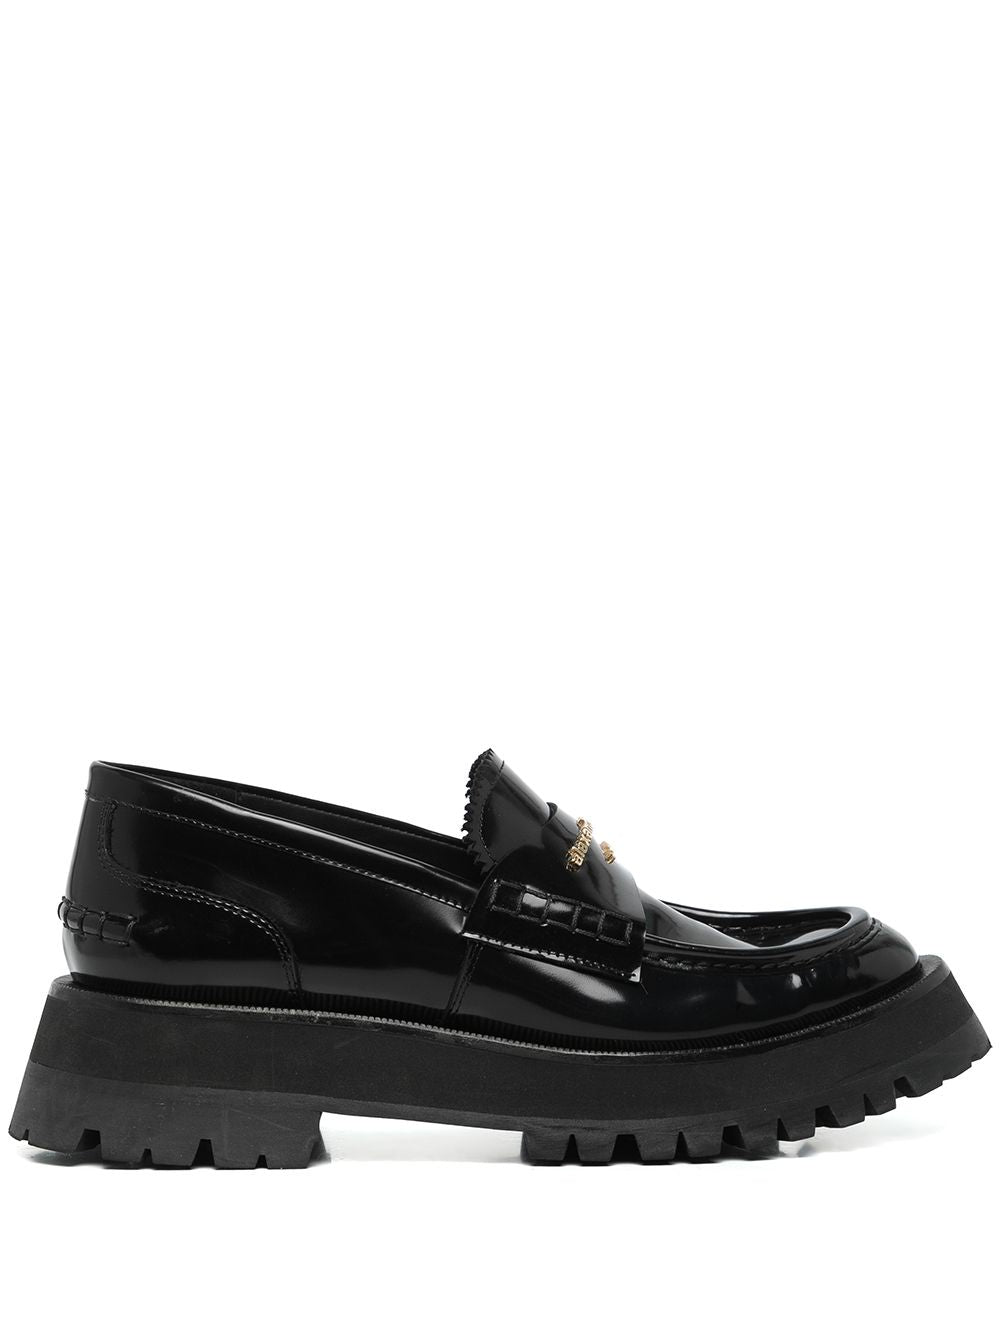 ALEXANDER WANG Chunky Rubber Lug-Sole Black Box Loafers for Women with Gold-Tone Logo Lettering